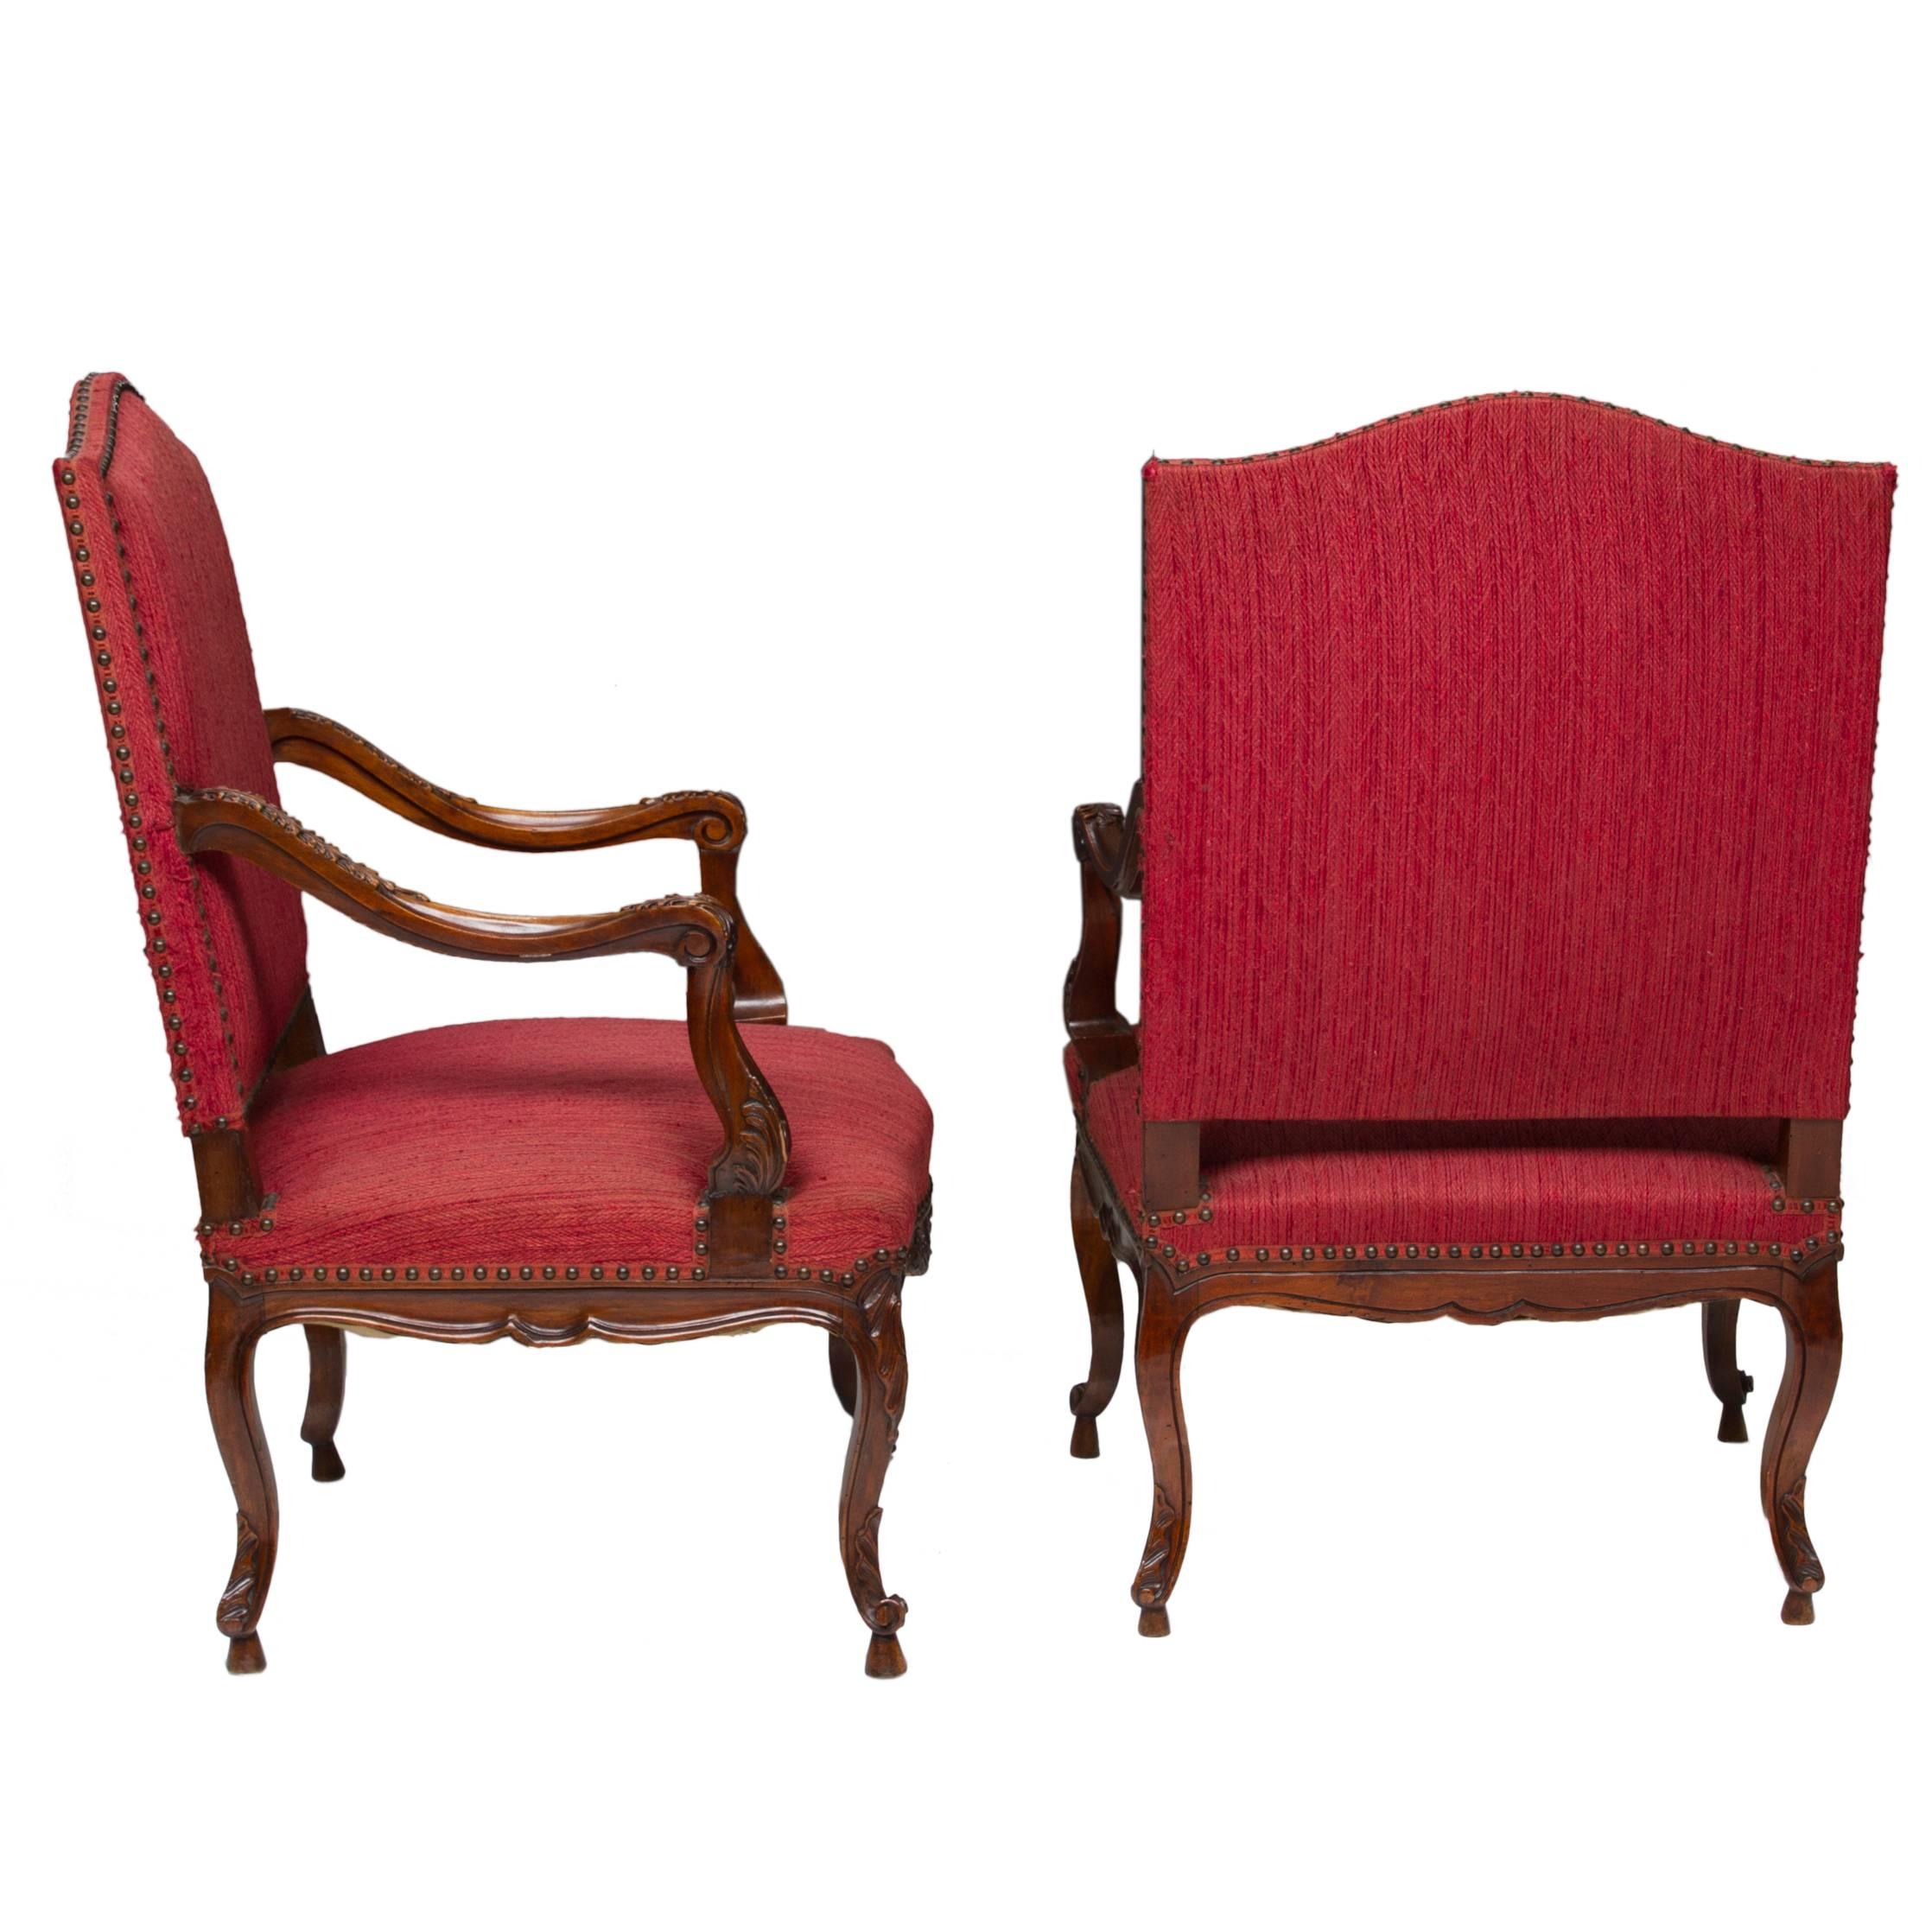 A great pair of Louis XV walnut fauteuil's with a shaped flat back, dipped and carved wood arm pad, set back arm support, carved cusp of the front rail. Turned out scroll resting on a shoe and fabric in very useable condition. The wooden frame is